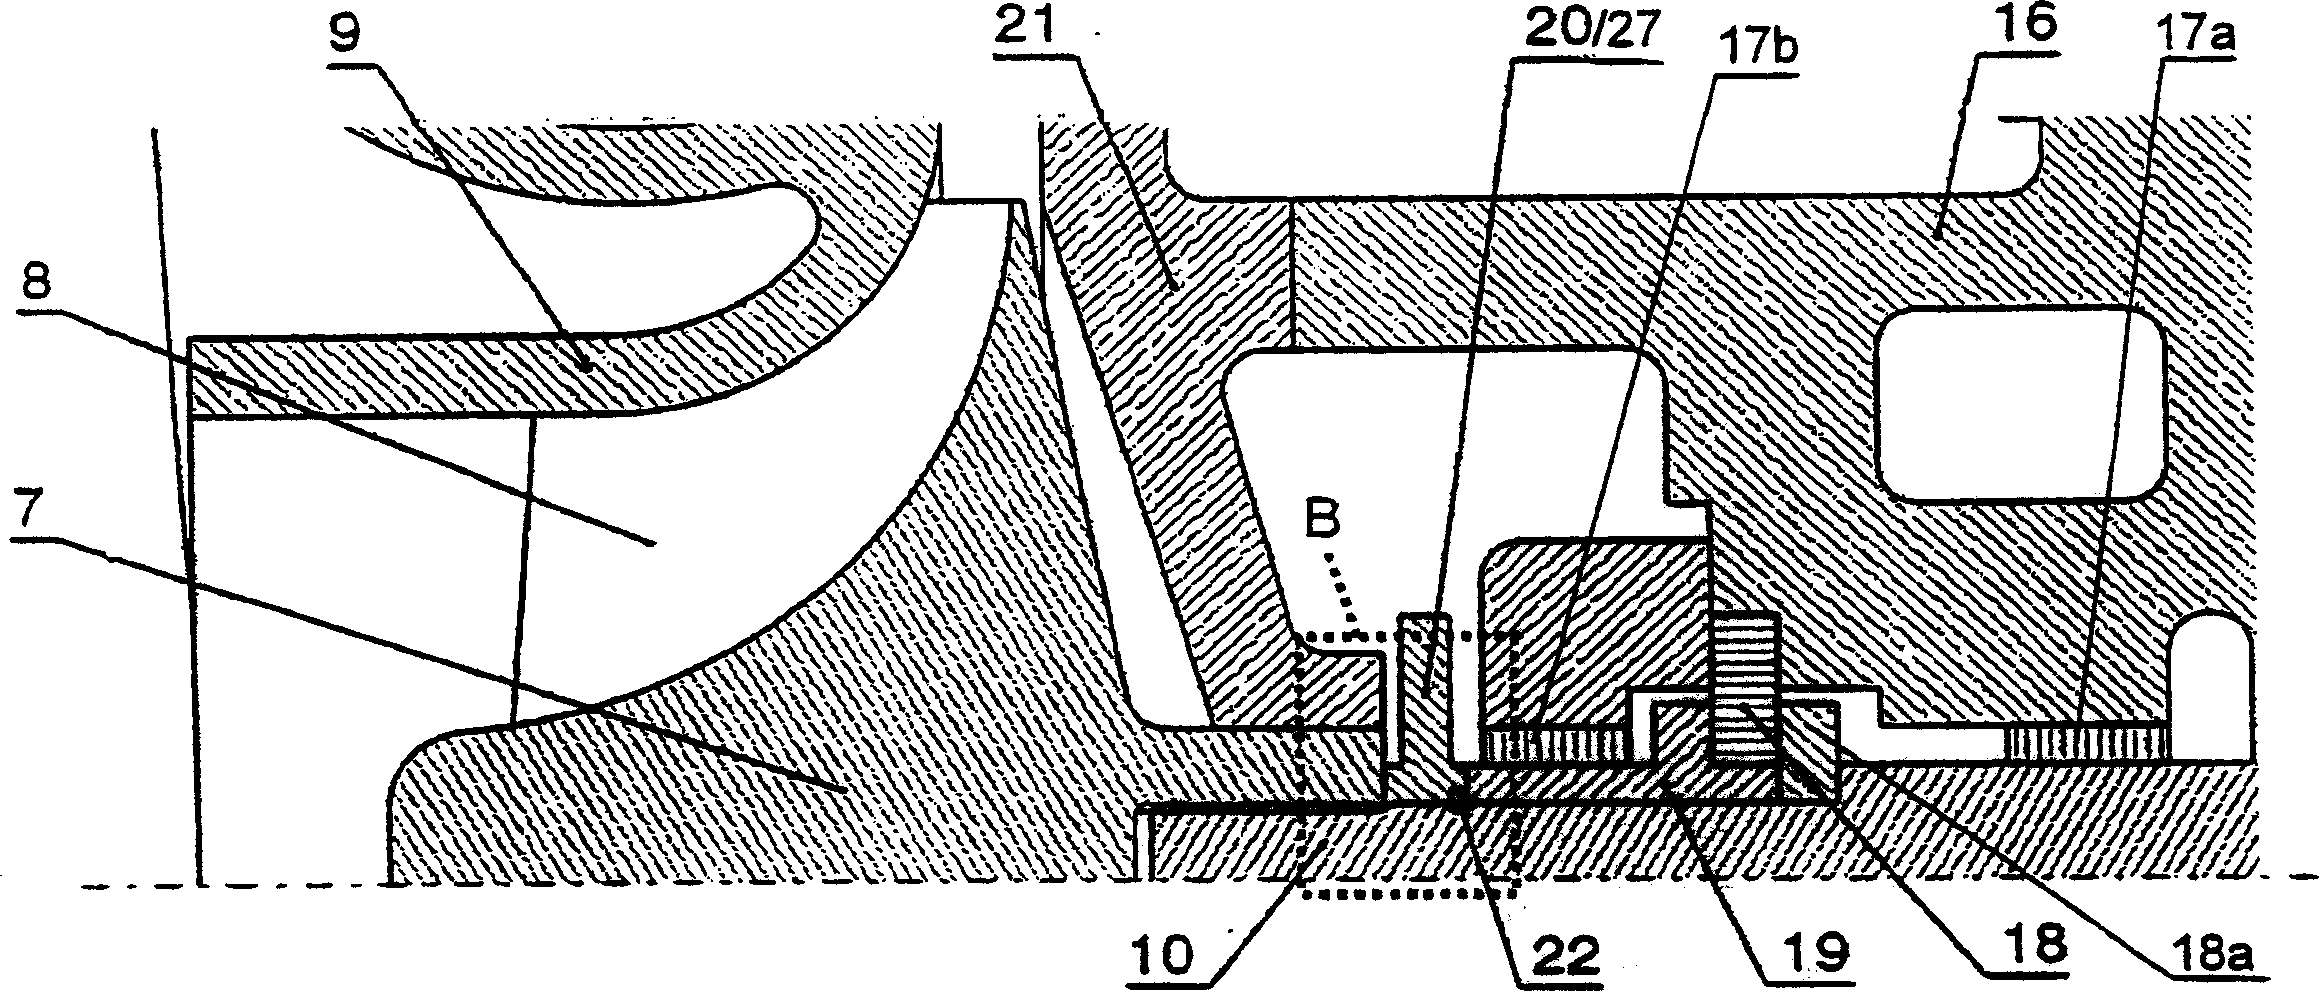 Turbo charger with means on the shaft for axially securing of said shaft if the compressor wheel bursts